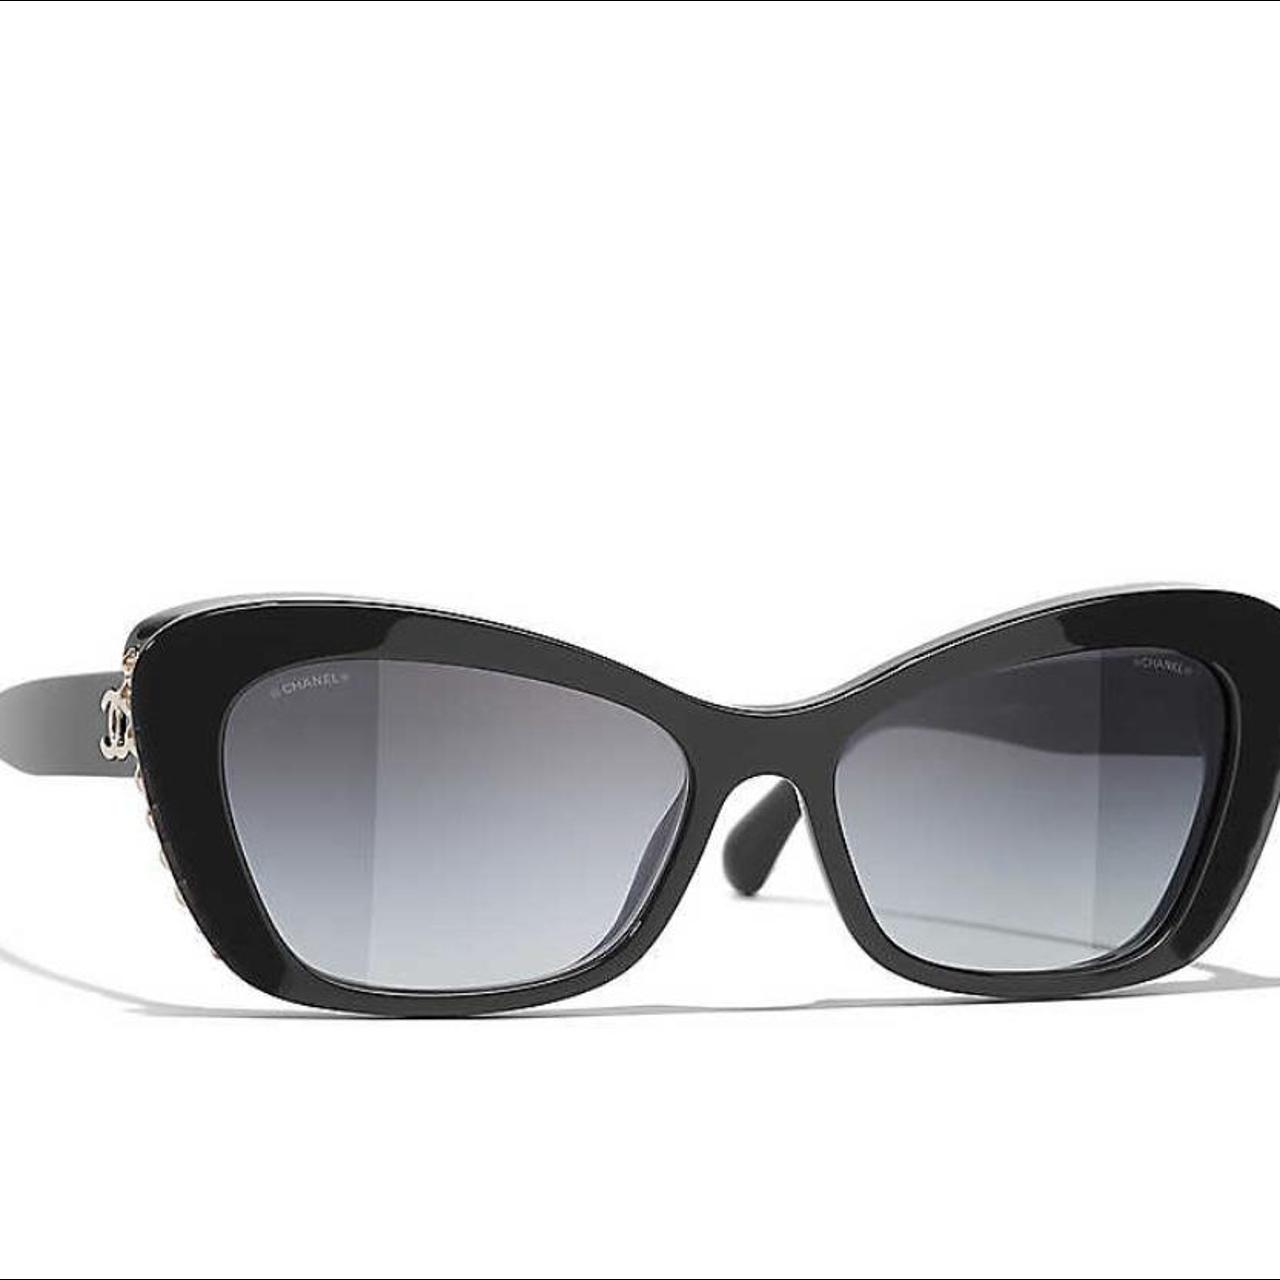 Chanel Oval Sunglasses - Acetate and Metal, Black - UV Protected - Women's Sunglasses - 9132 C622/S6